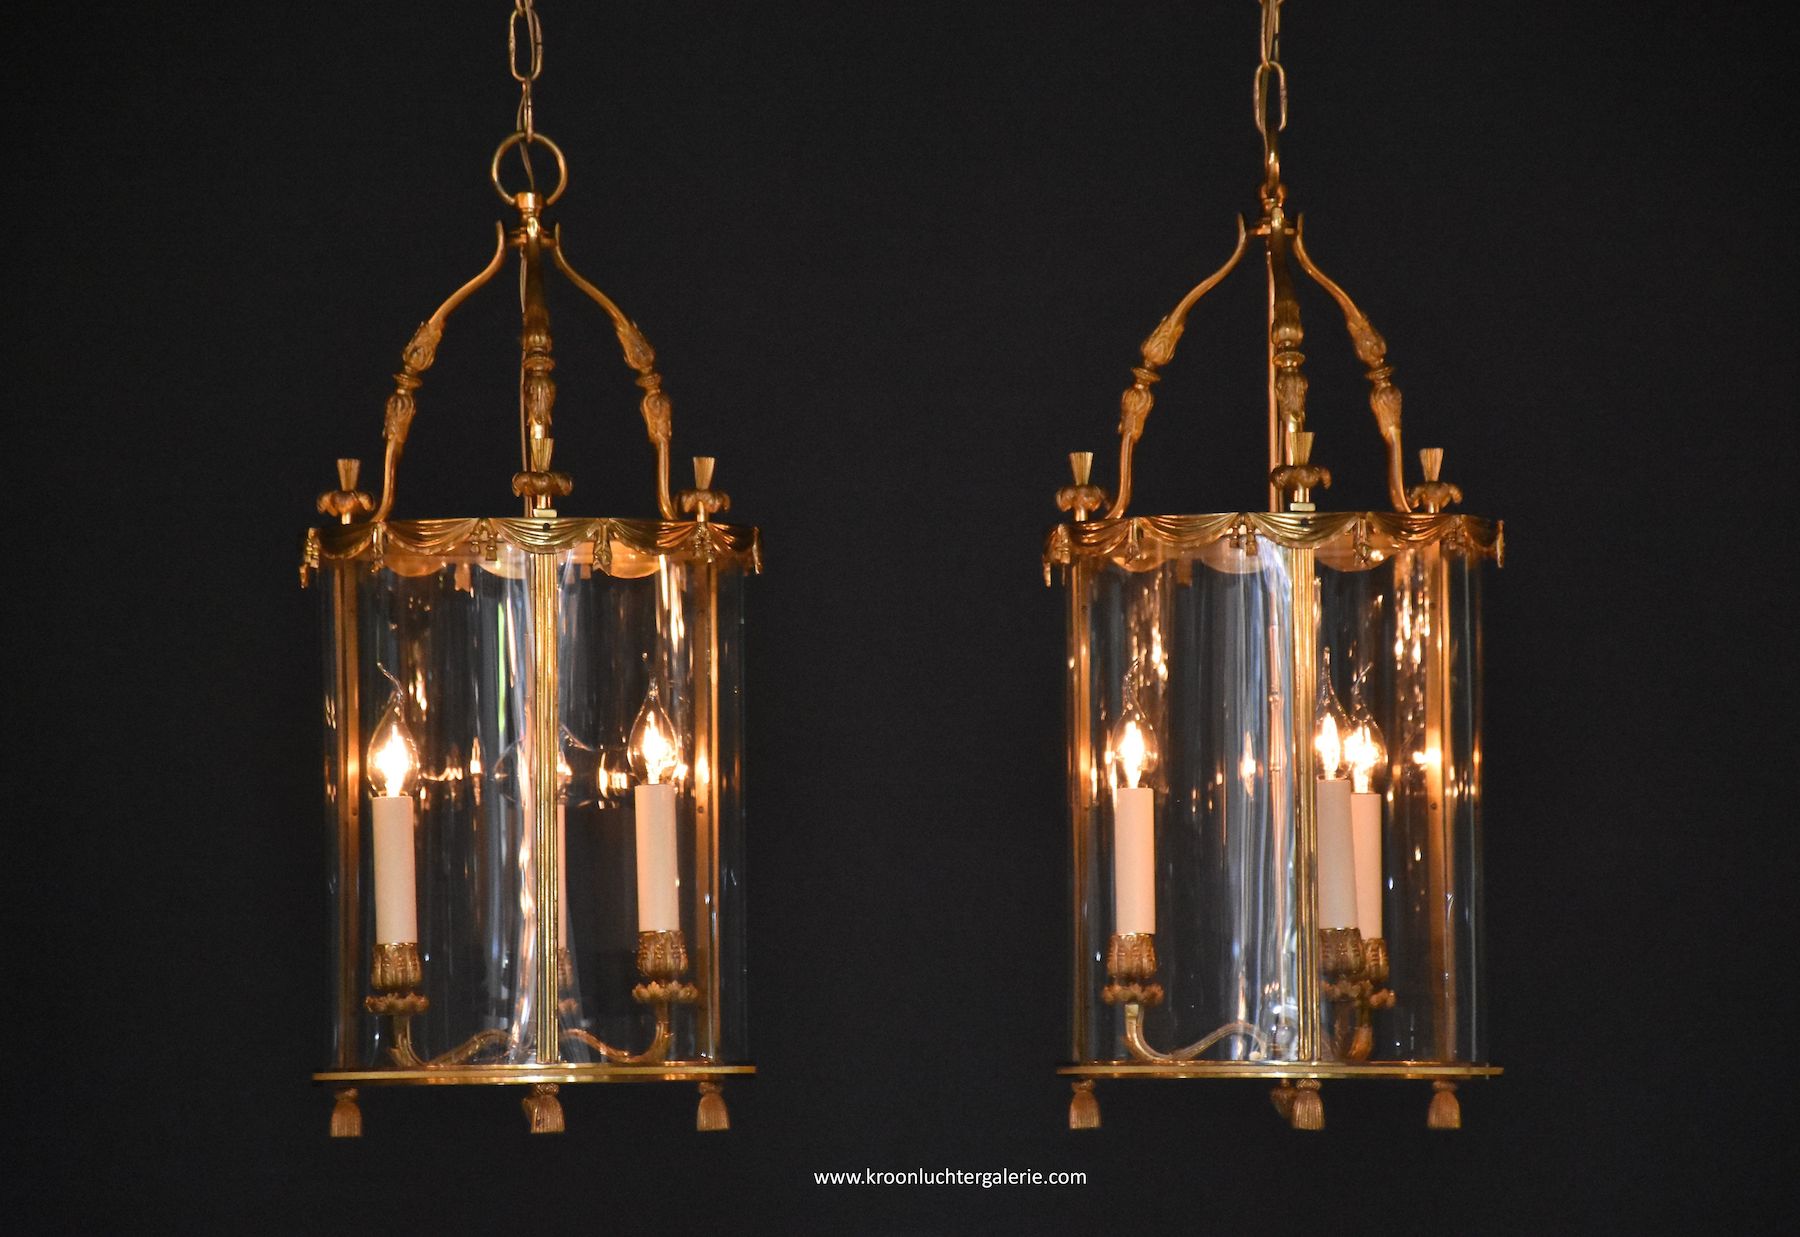 A pair of French lanterns